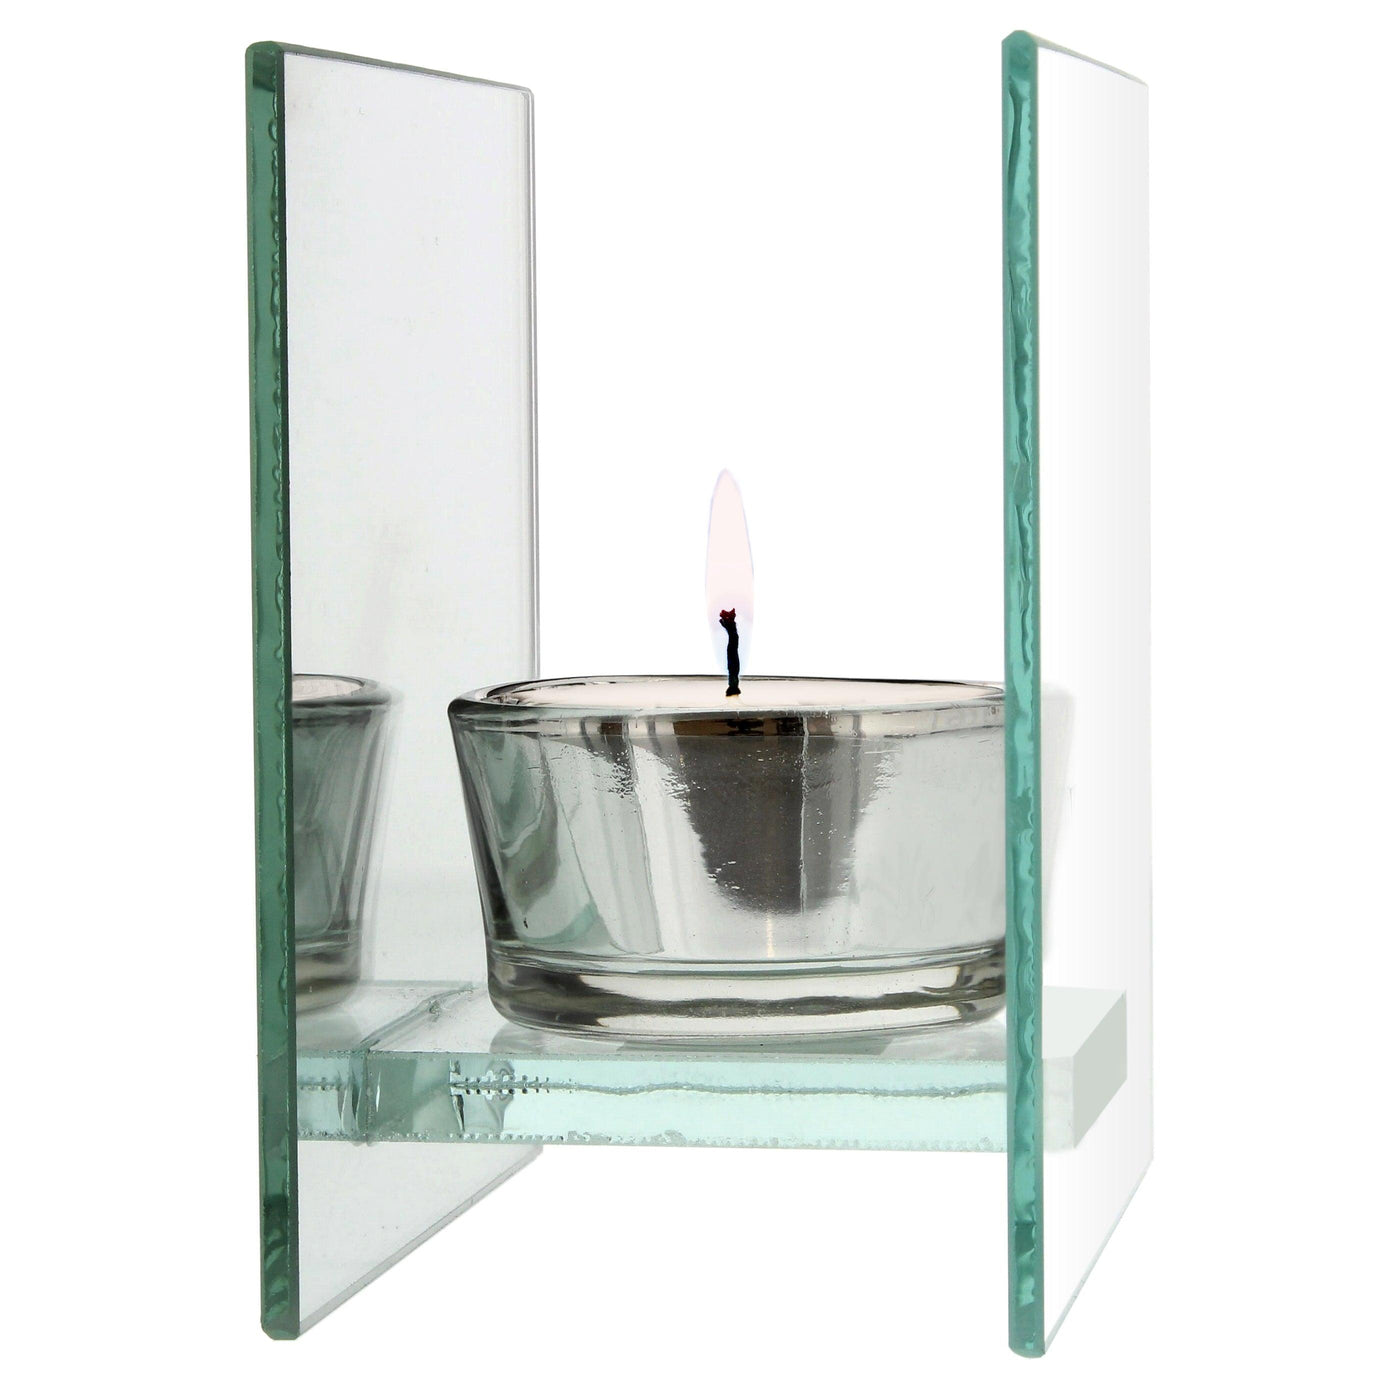 Personalised Diamante Mirrored Glass Tea Light Candle Holder - Shop Personalised Gifts